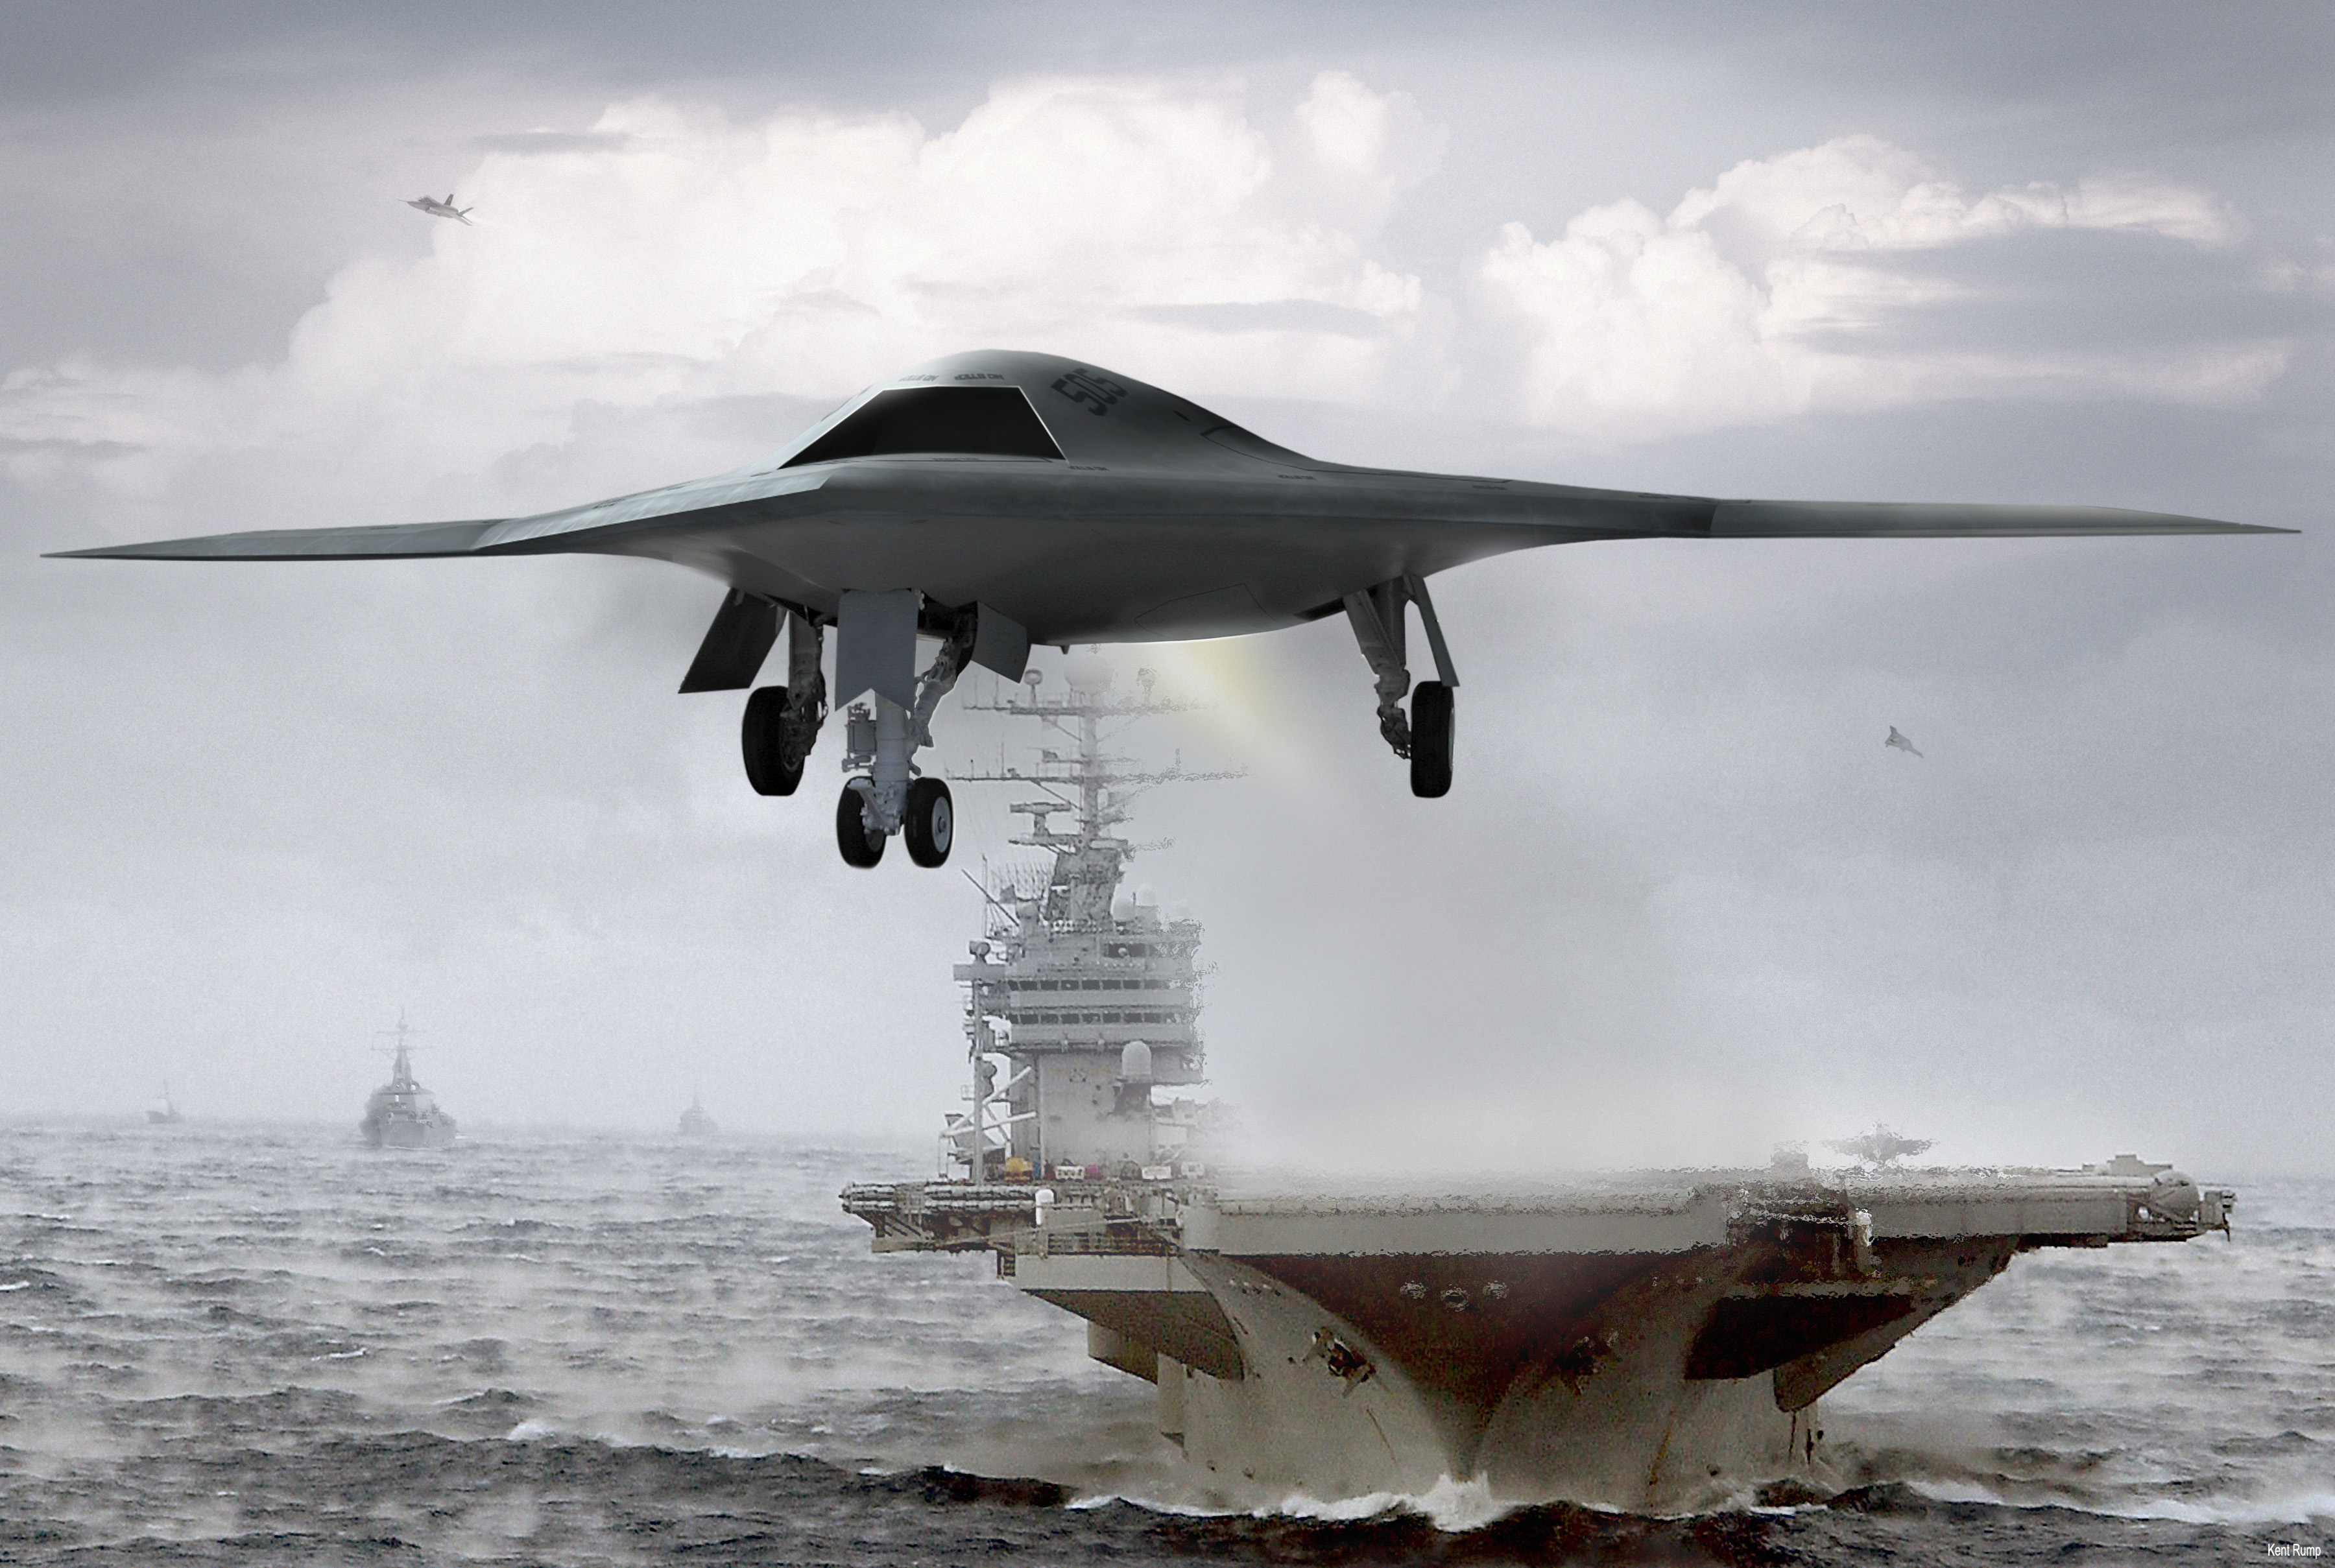 uav, X47b, Carrier, Ships, Boats, Vehicles, Military, Jet, Fighter, Ocean, Sea, Sky, Clouds, Waves Wallpaper